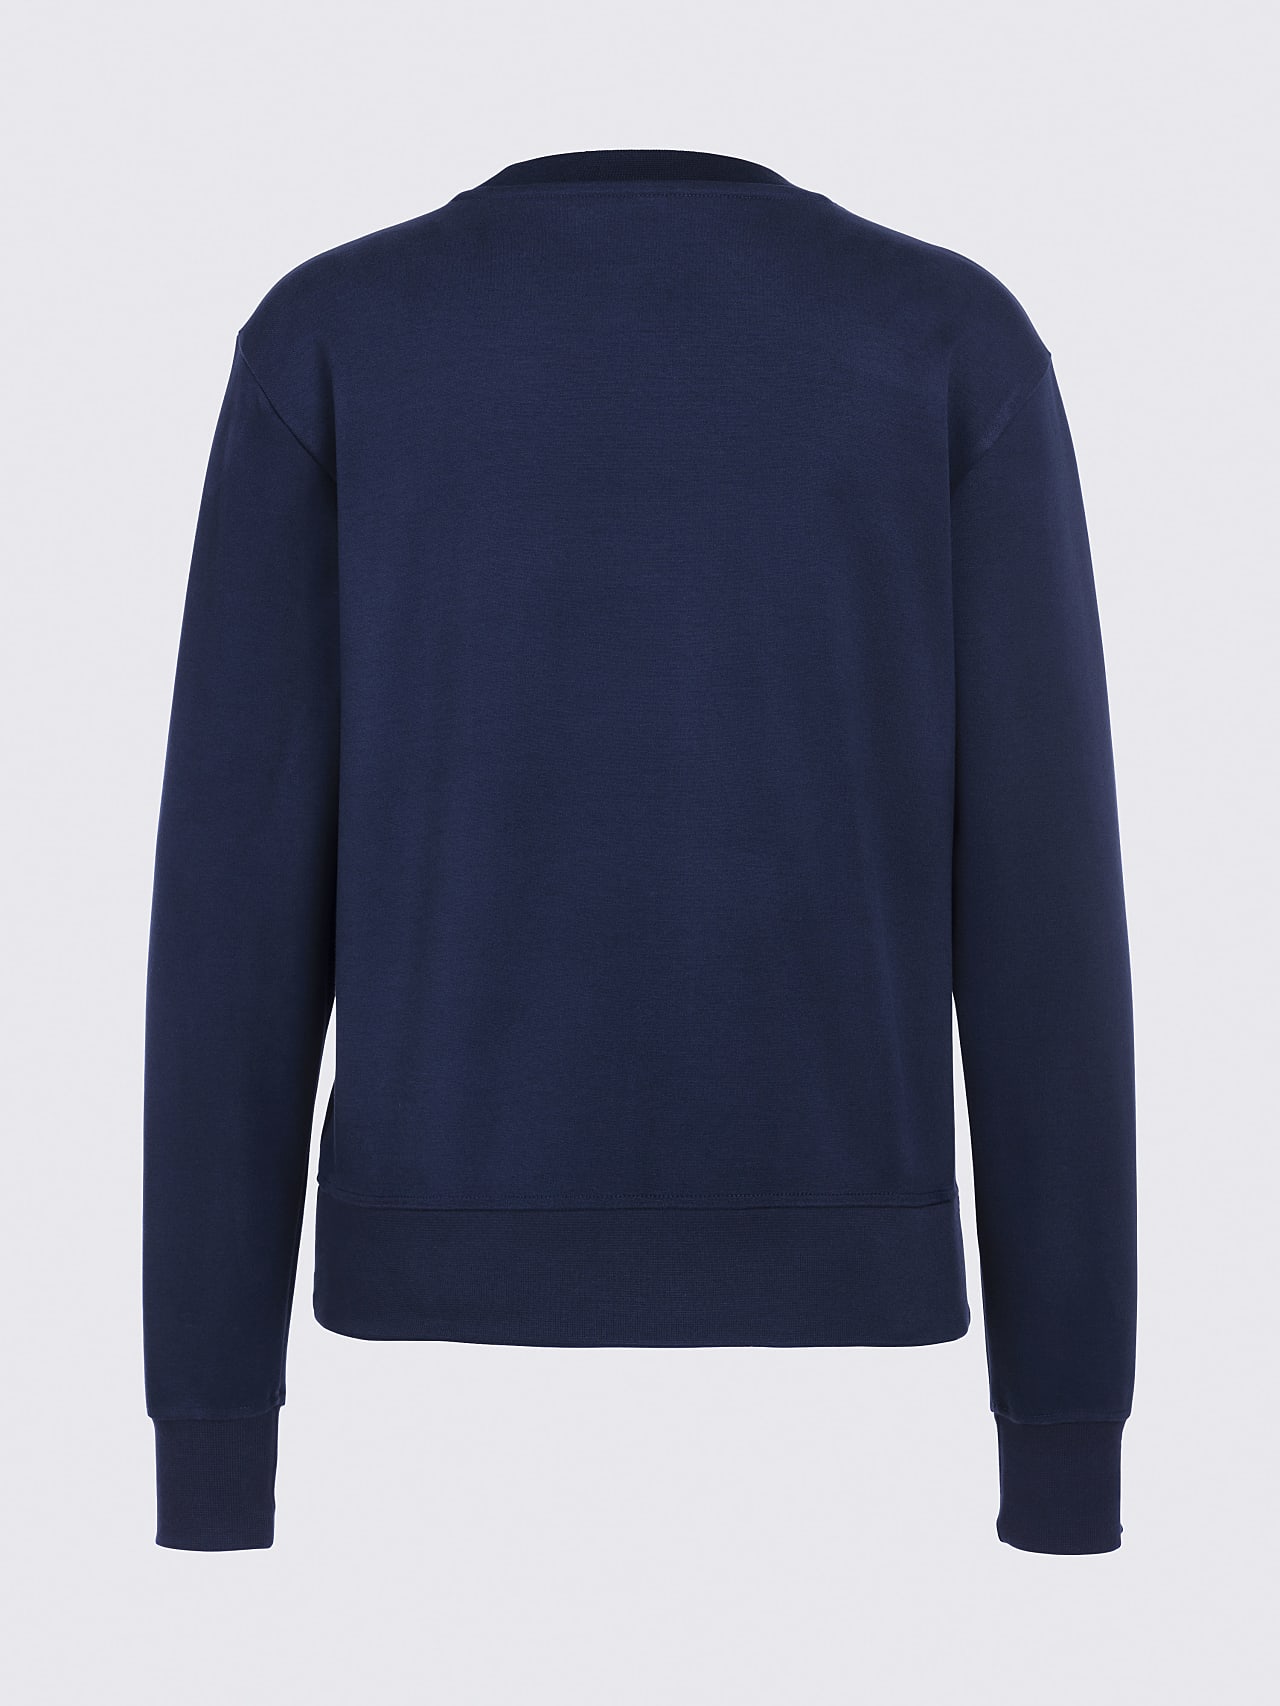 AlphaTauri | STEMB V1.Y6.01 | Sweater with Logo Embroidery in navy for Women